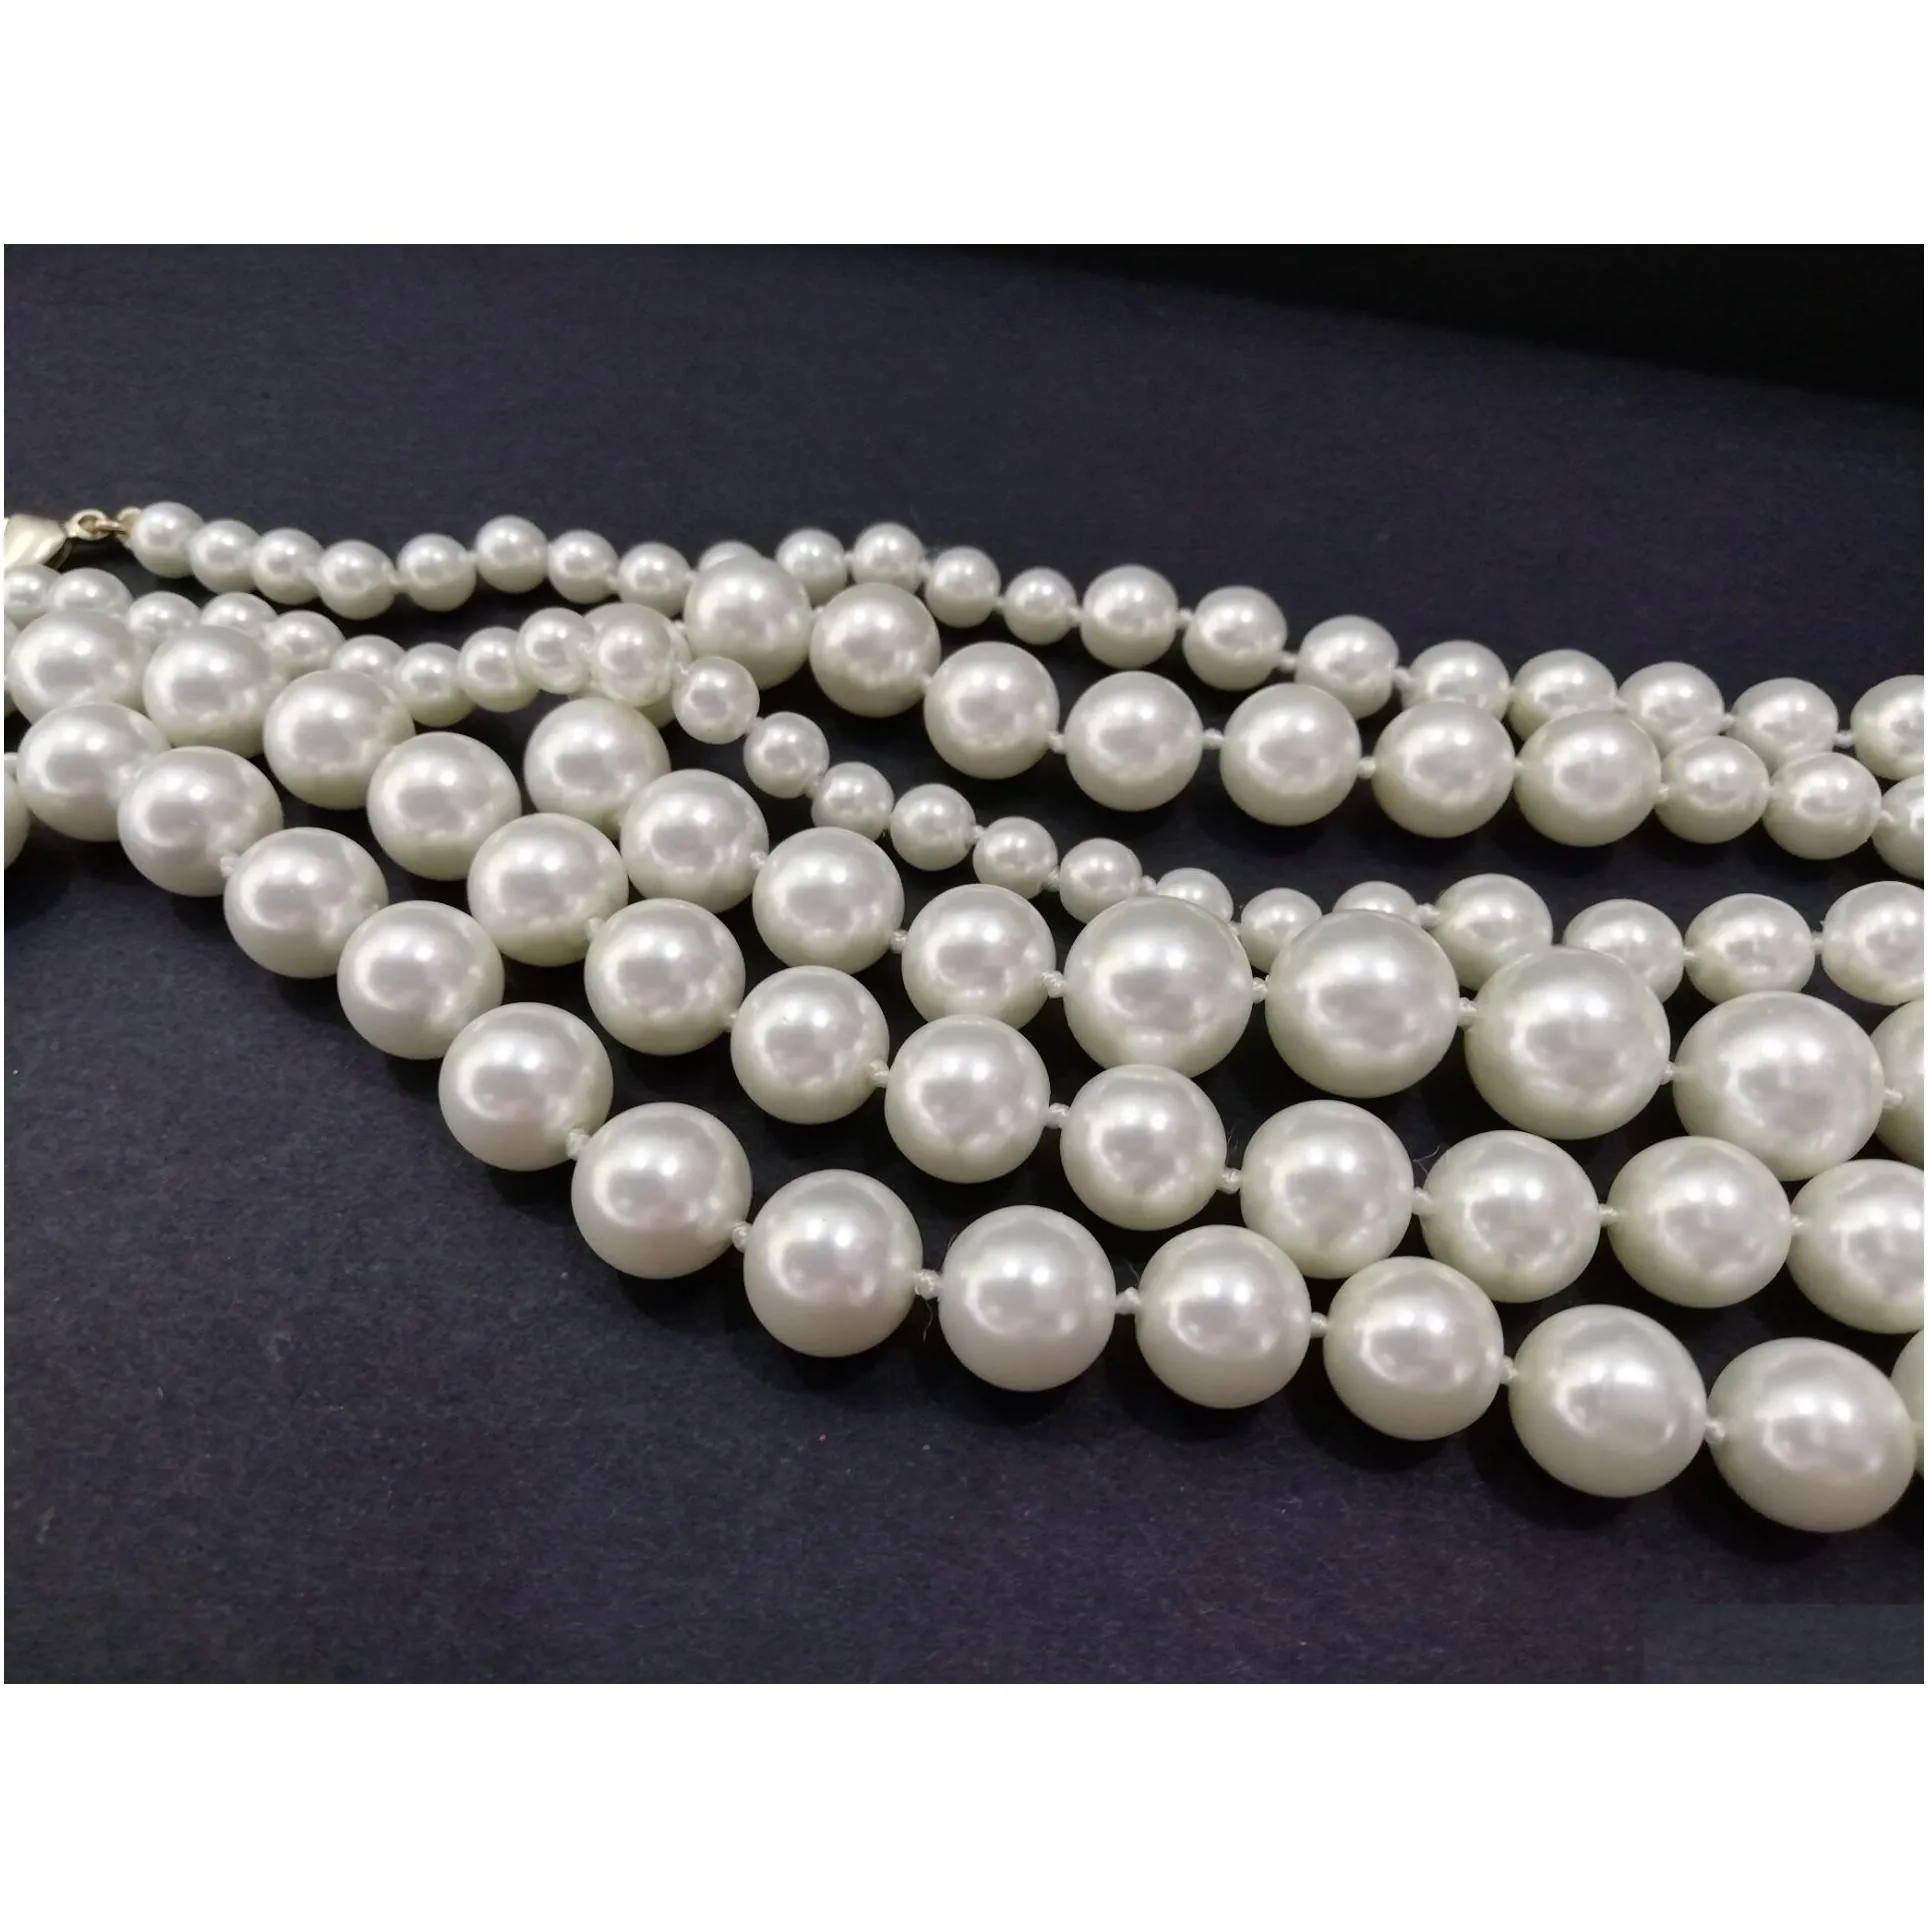 Fashion Long Pearl Necklaces for Women Men Party wedding lovers gift Bride Channel necklace Designer Jewelry With Flannel Bag